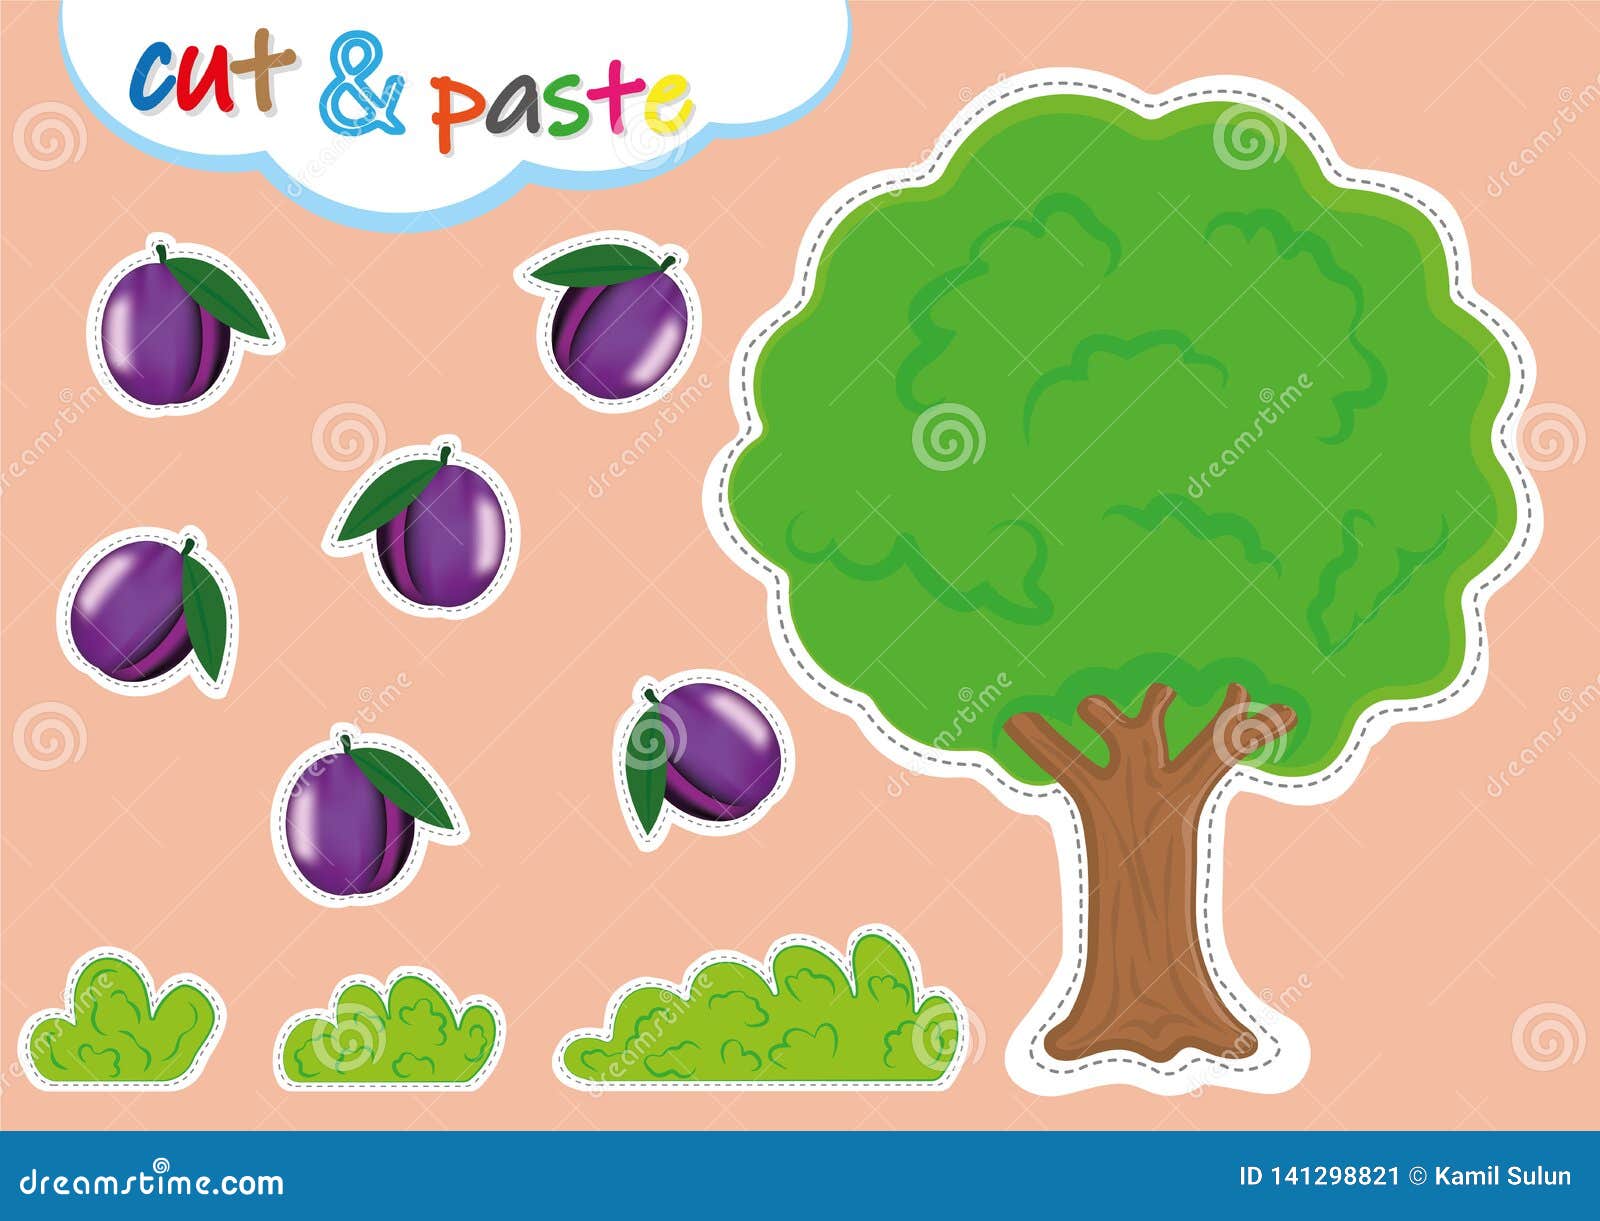 cut-and-paste-activities-for-kindergarten-preschool-cutting-and-pasting-worksheets-stock